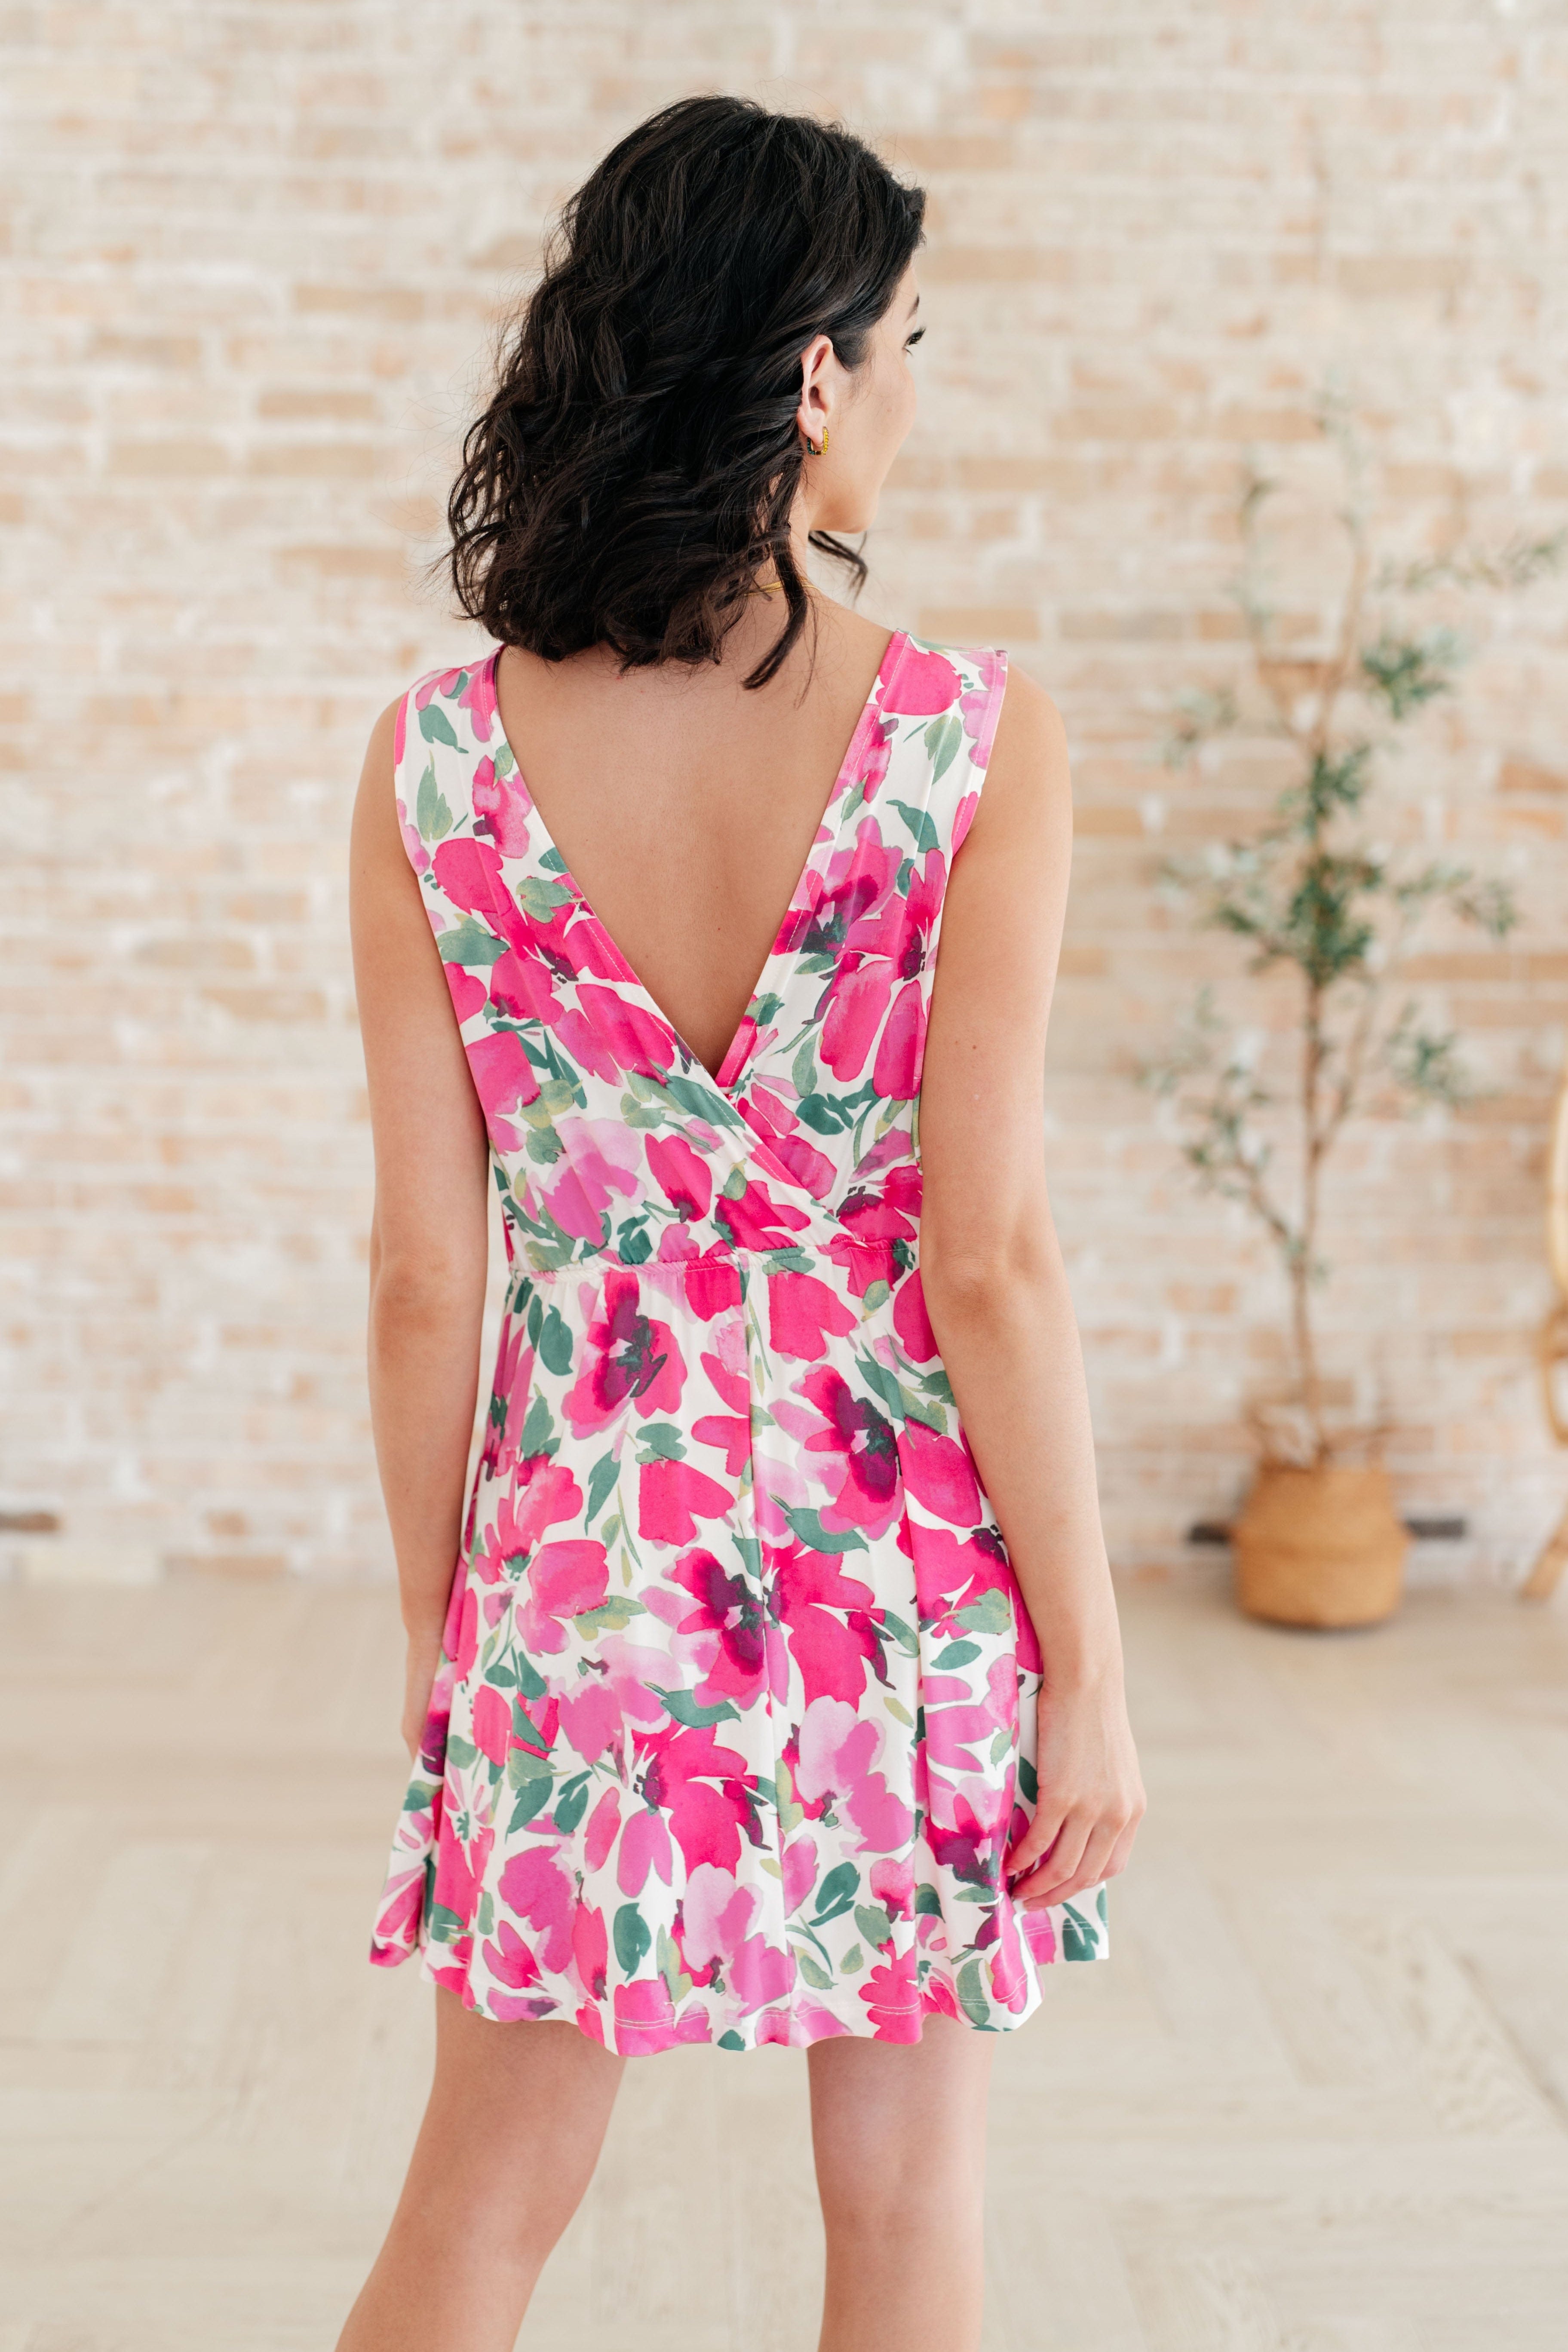 The Suns Been Quite Kind V-Neck Dress in Pink-Dresses-Stay Foxy Boutique, Florissant, Missouri